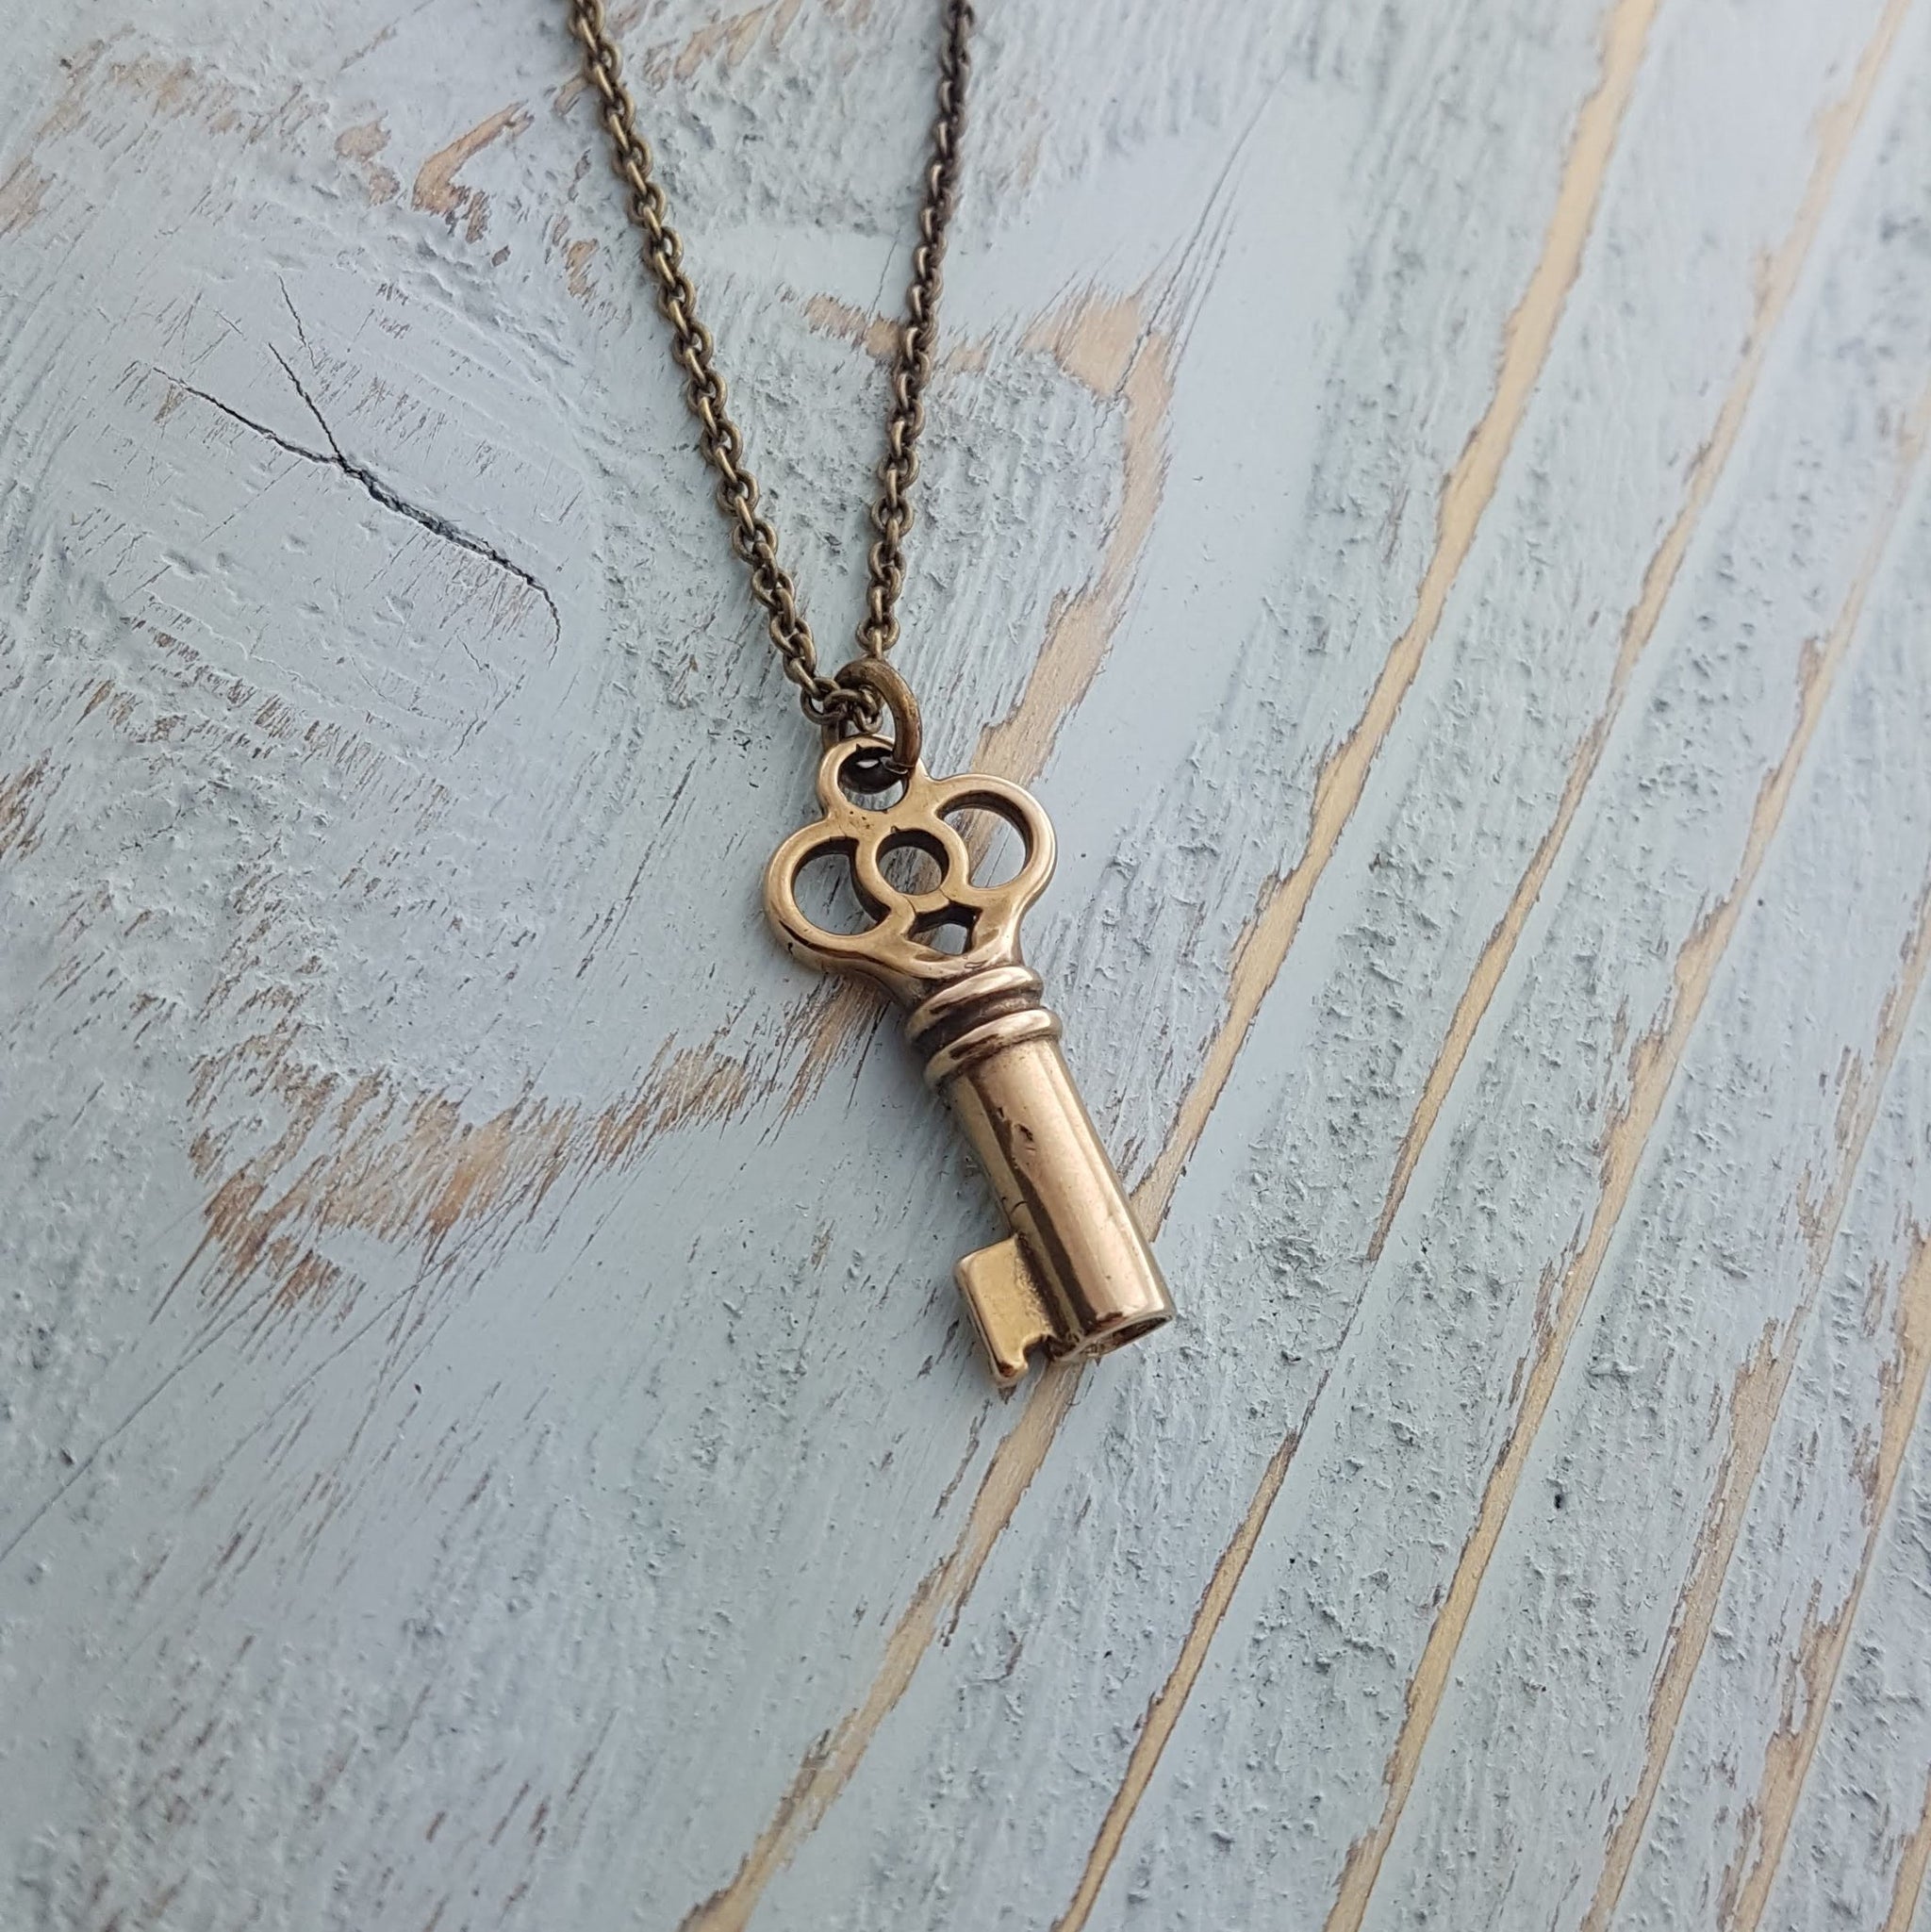 Clover Key Necklace - Gwen Delicious Jewelry Designs